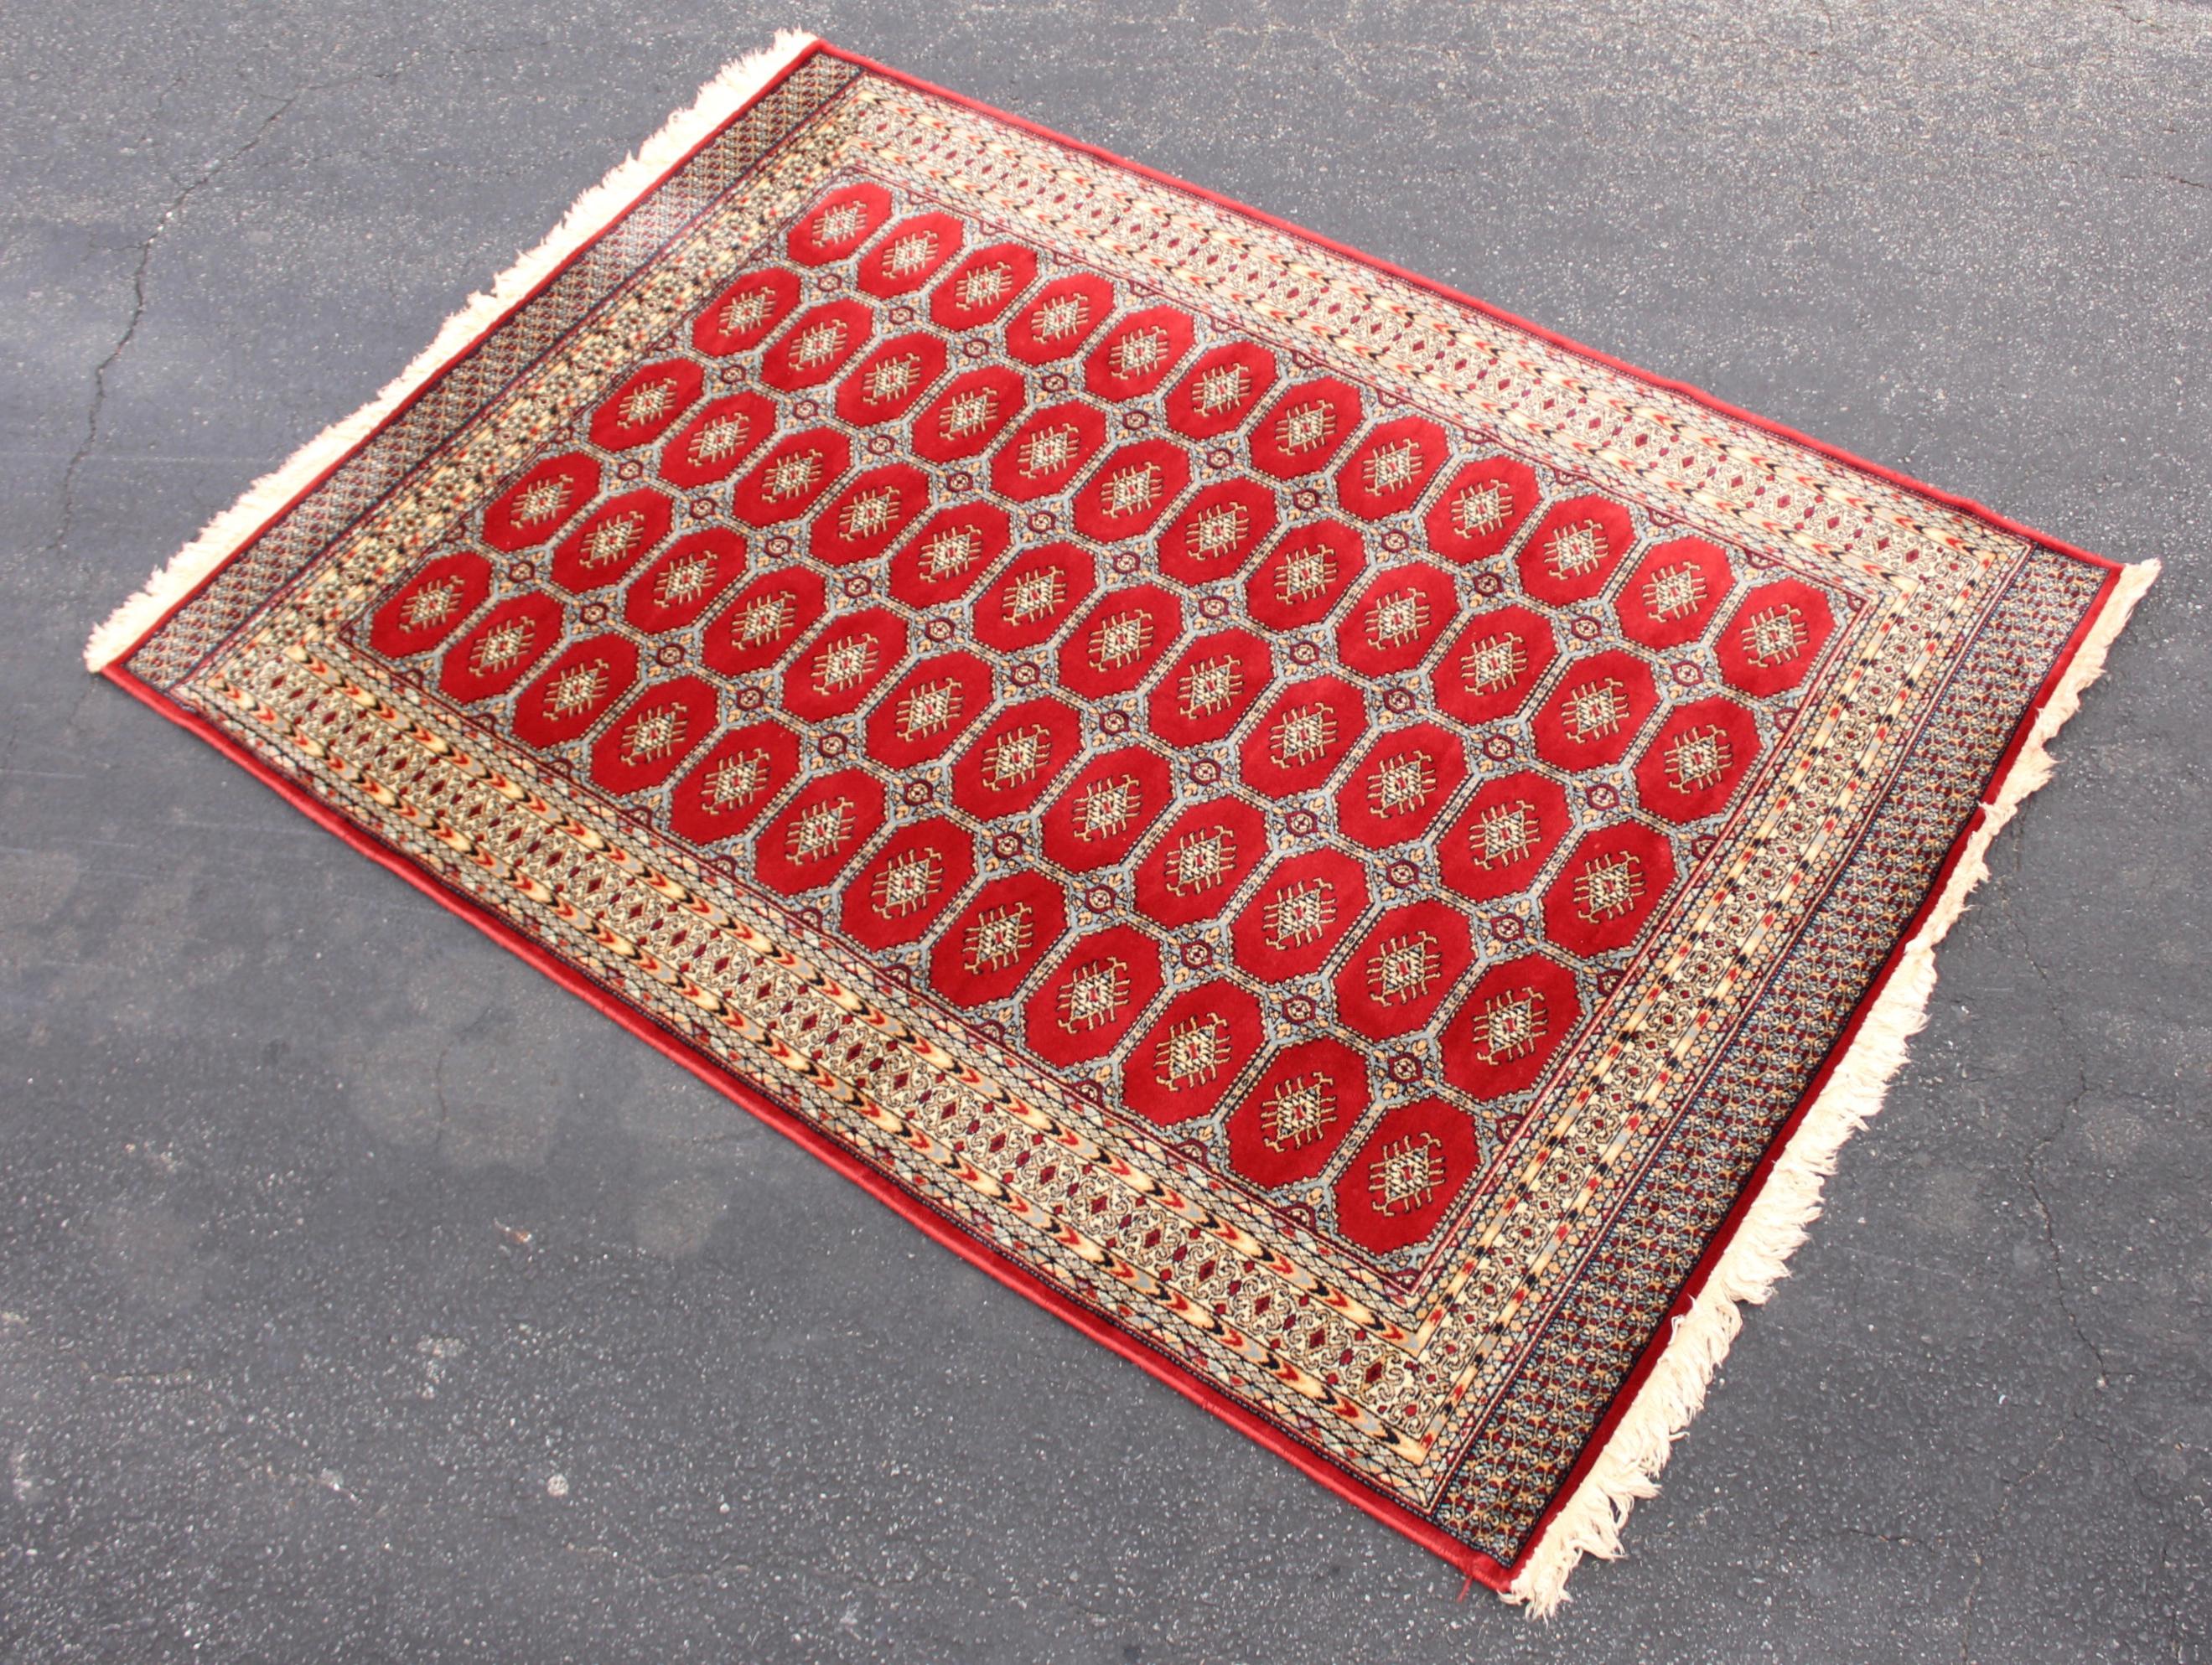 Stunning vintage Bokhara wool rug made in Greece, newly professionally clean it was appraised at $5000 in 1992.